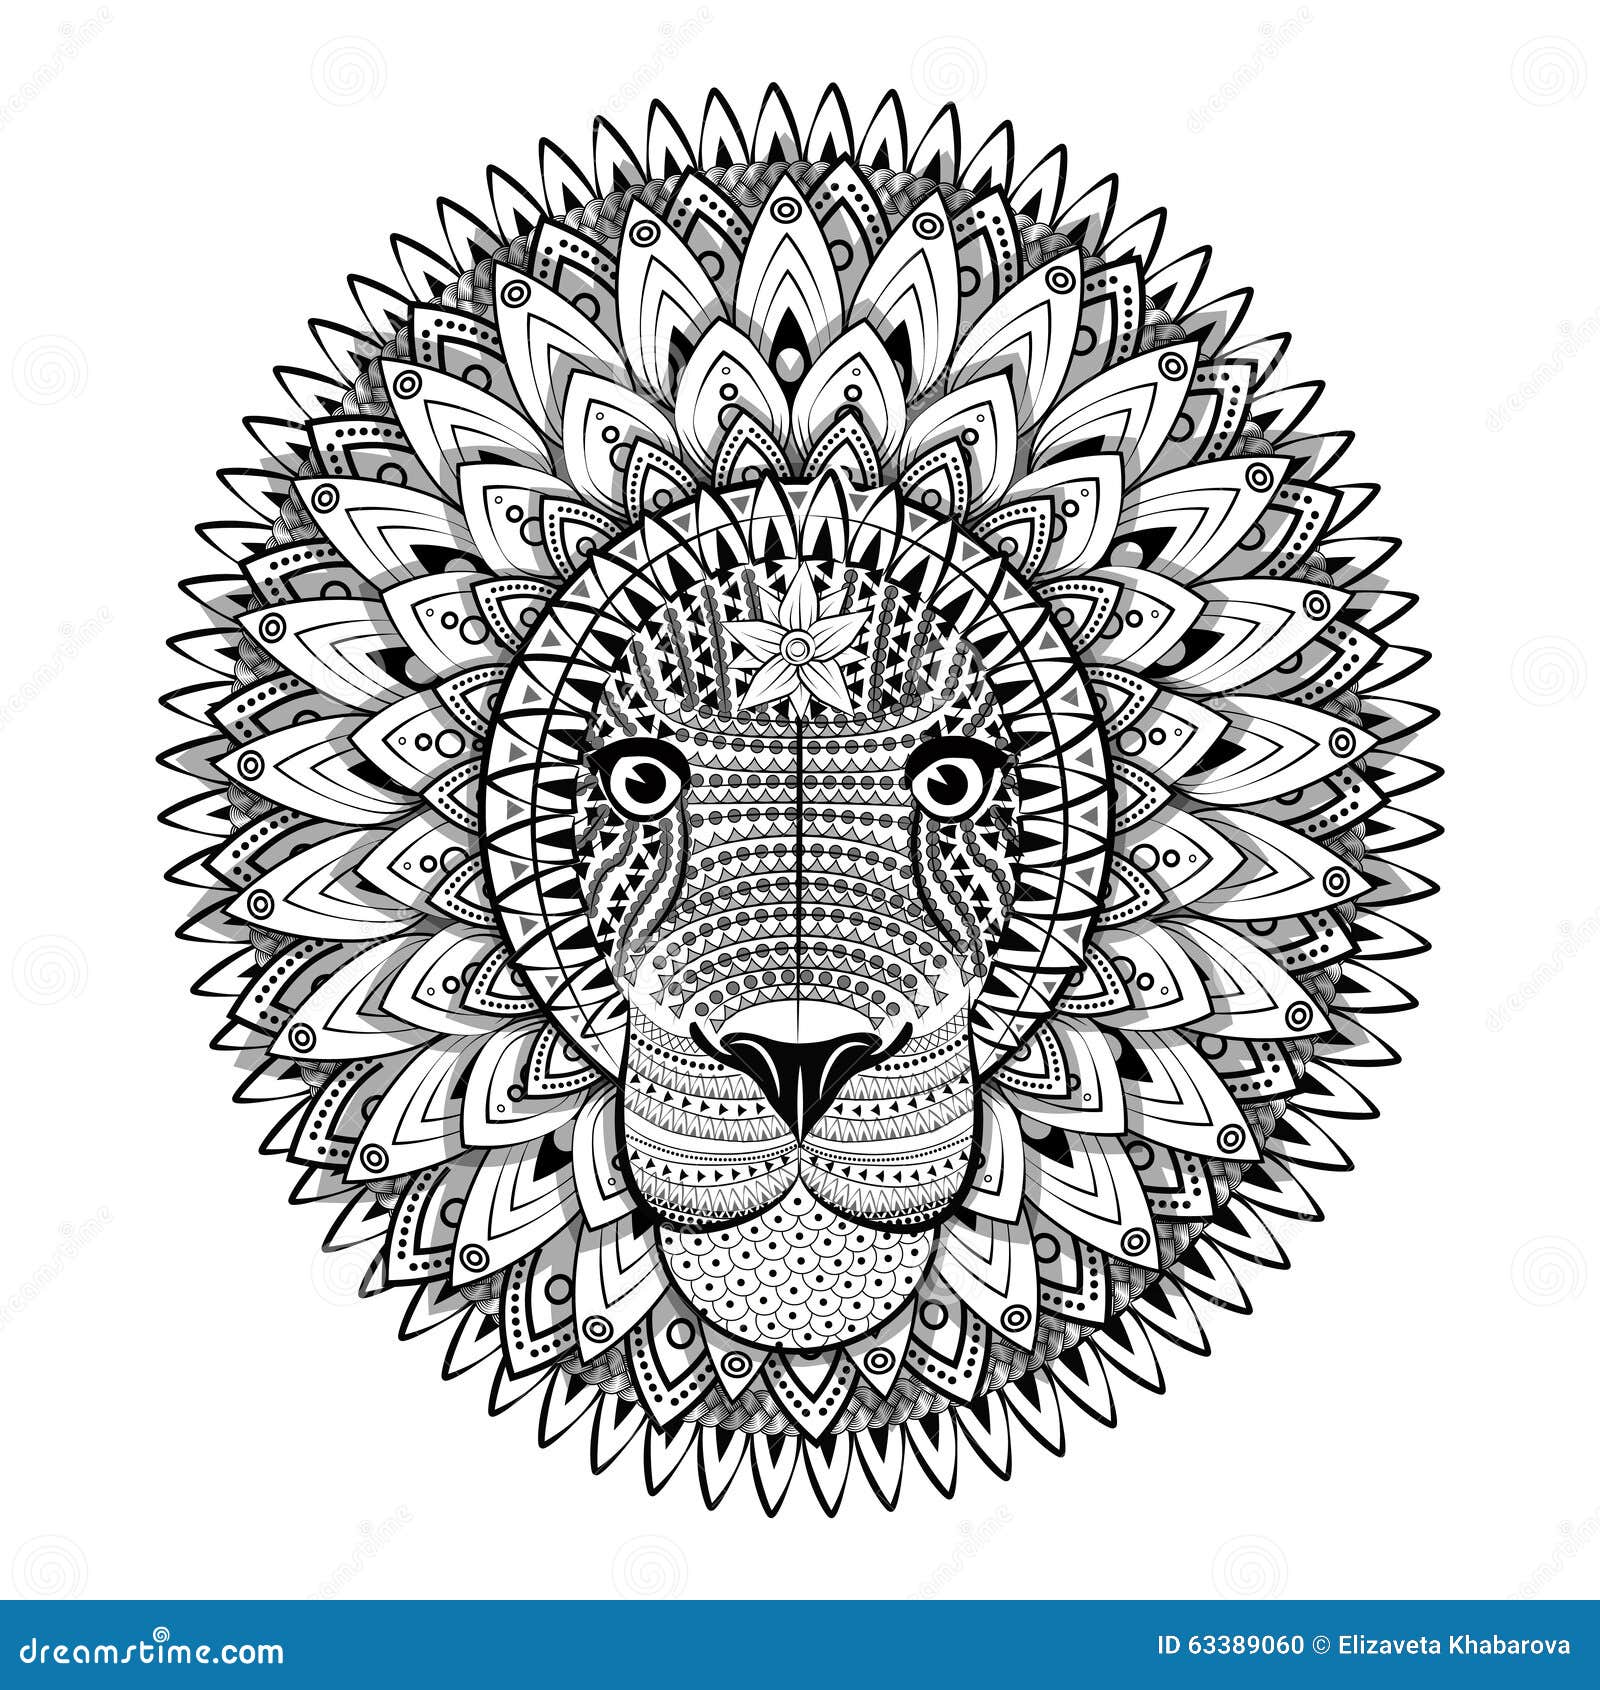 Update 91 about geometric lion tattoo drawing unmissable  indaotaonec